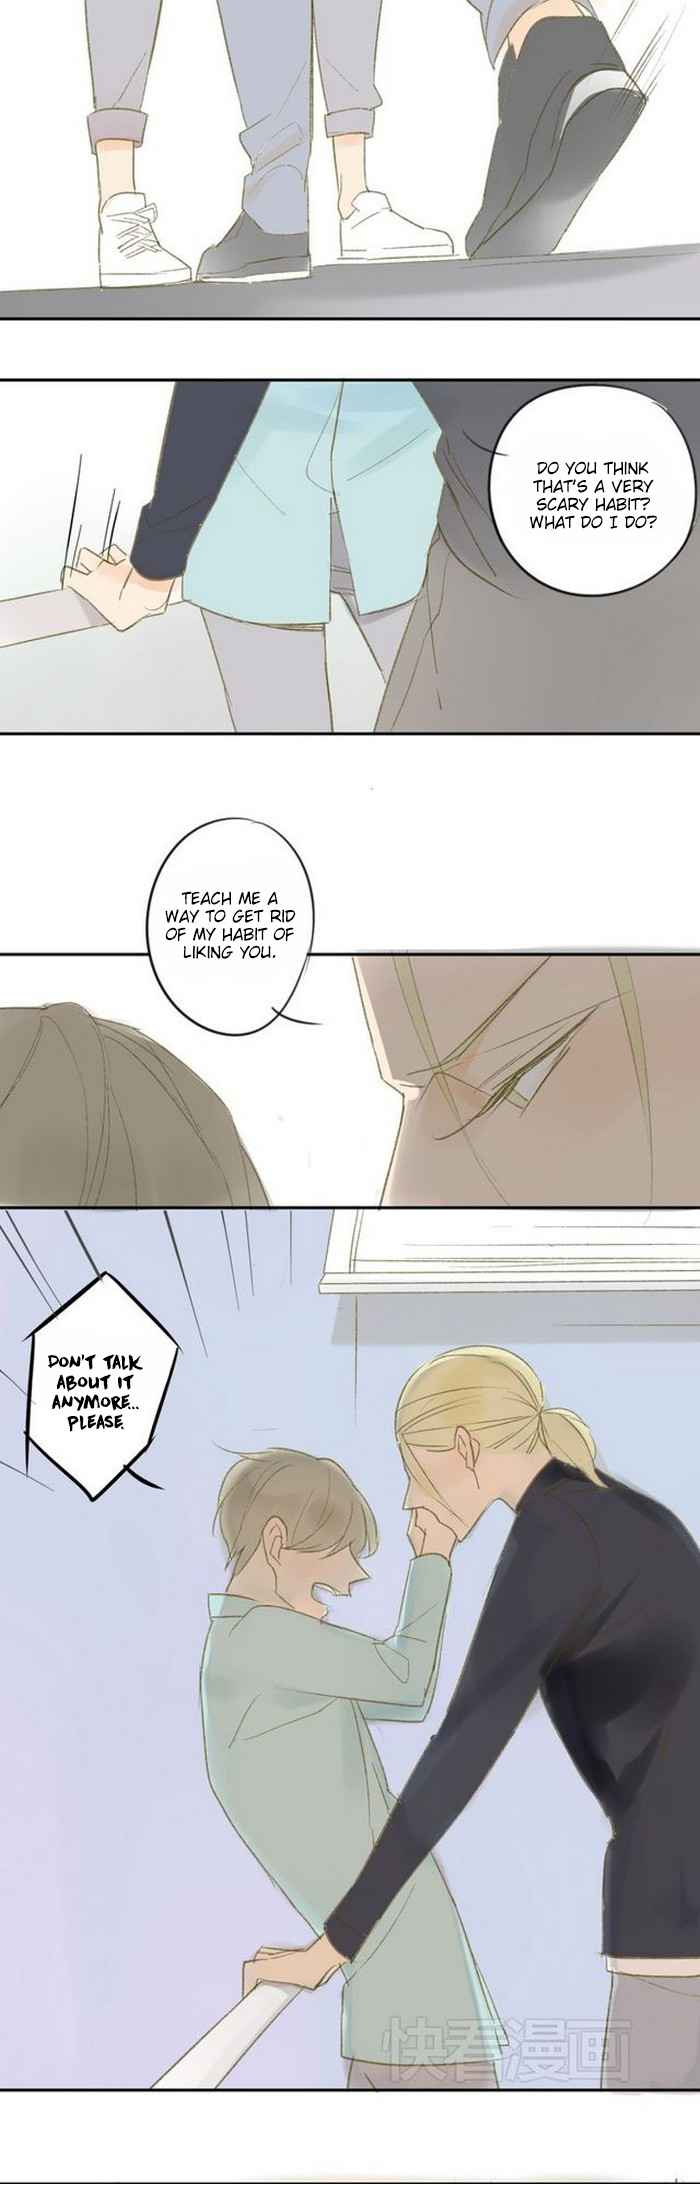 Classmate Relationship? Ch. 53 I'm Happy That I Was Able To Meet You